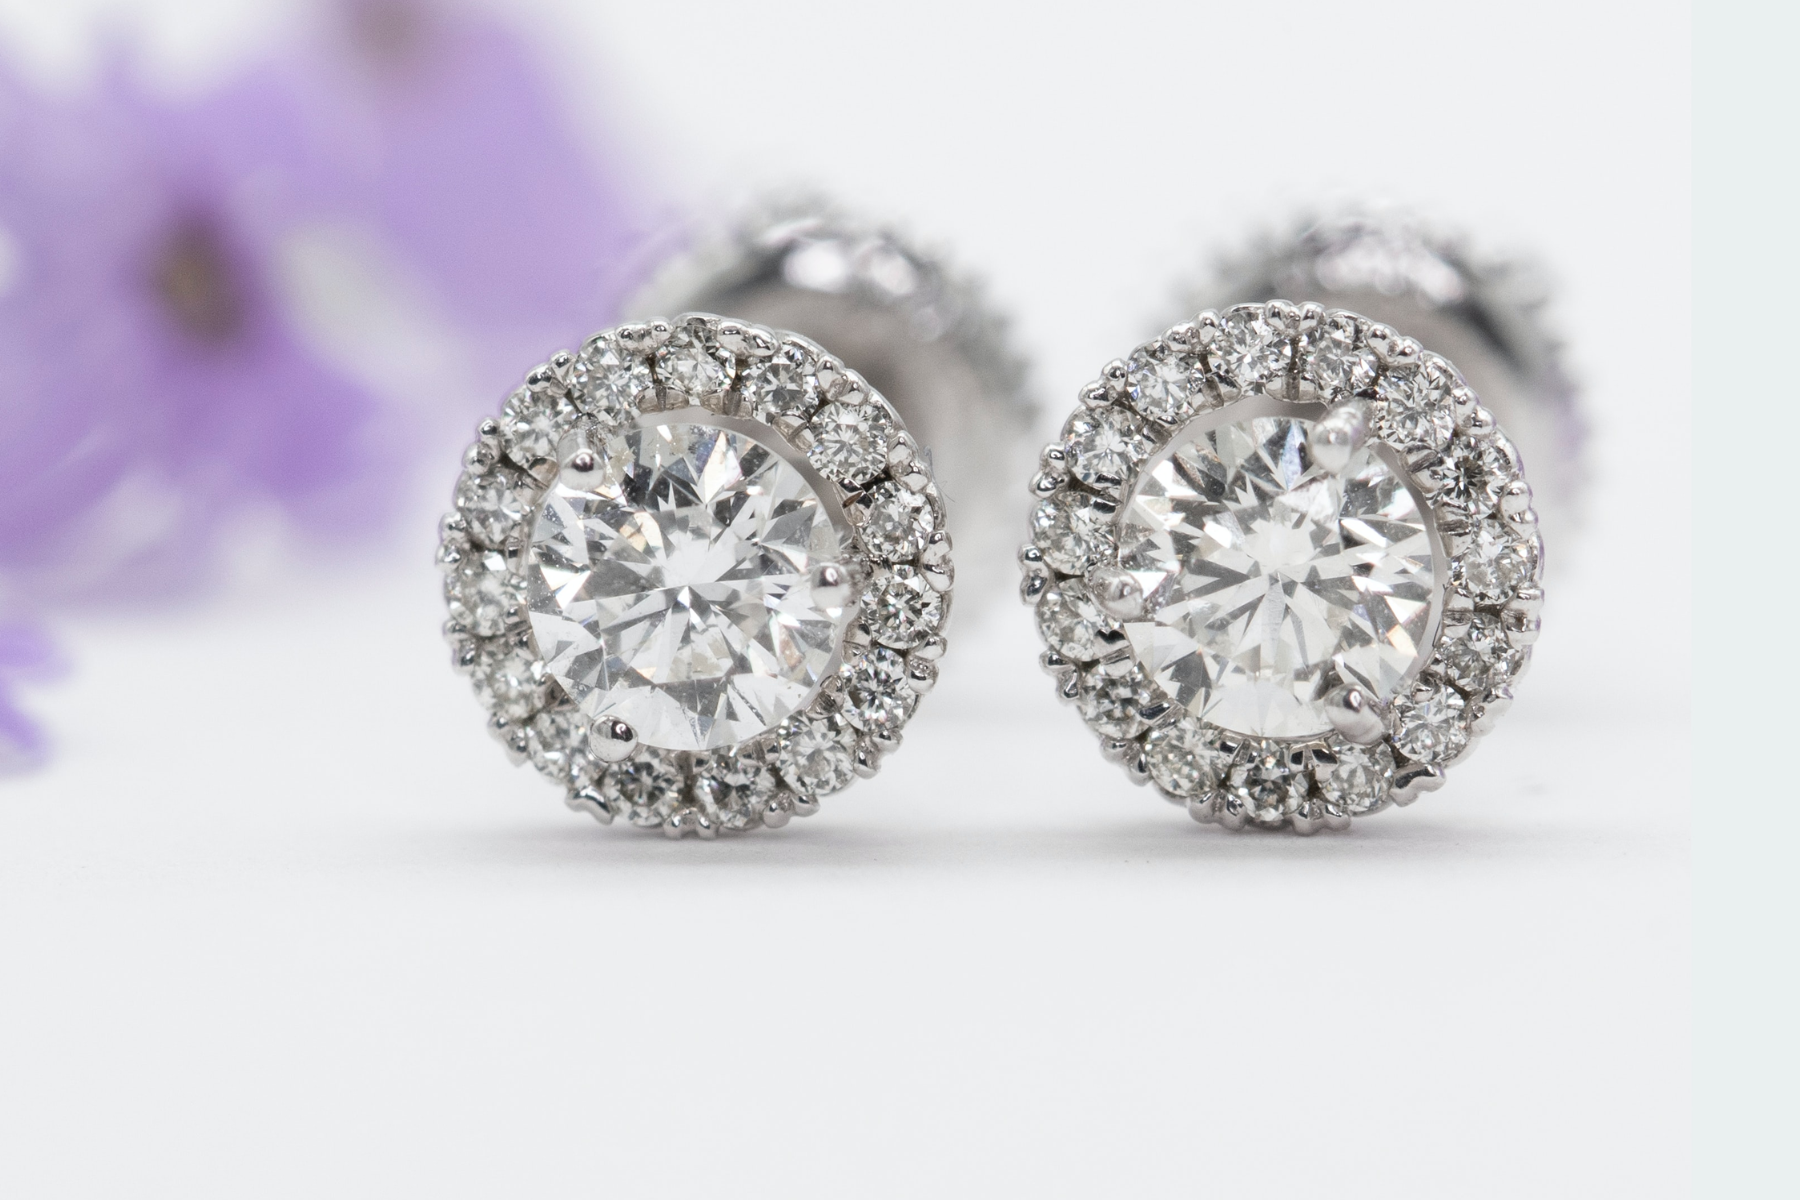 A pair of round platinum earrings